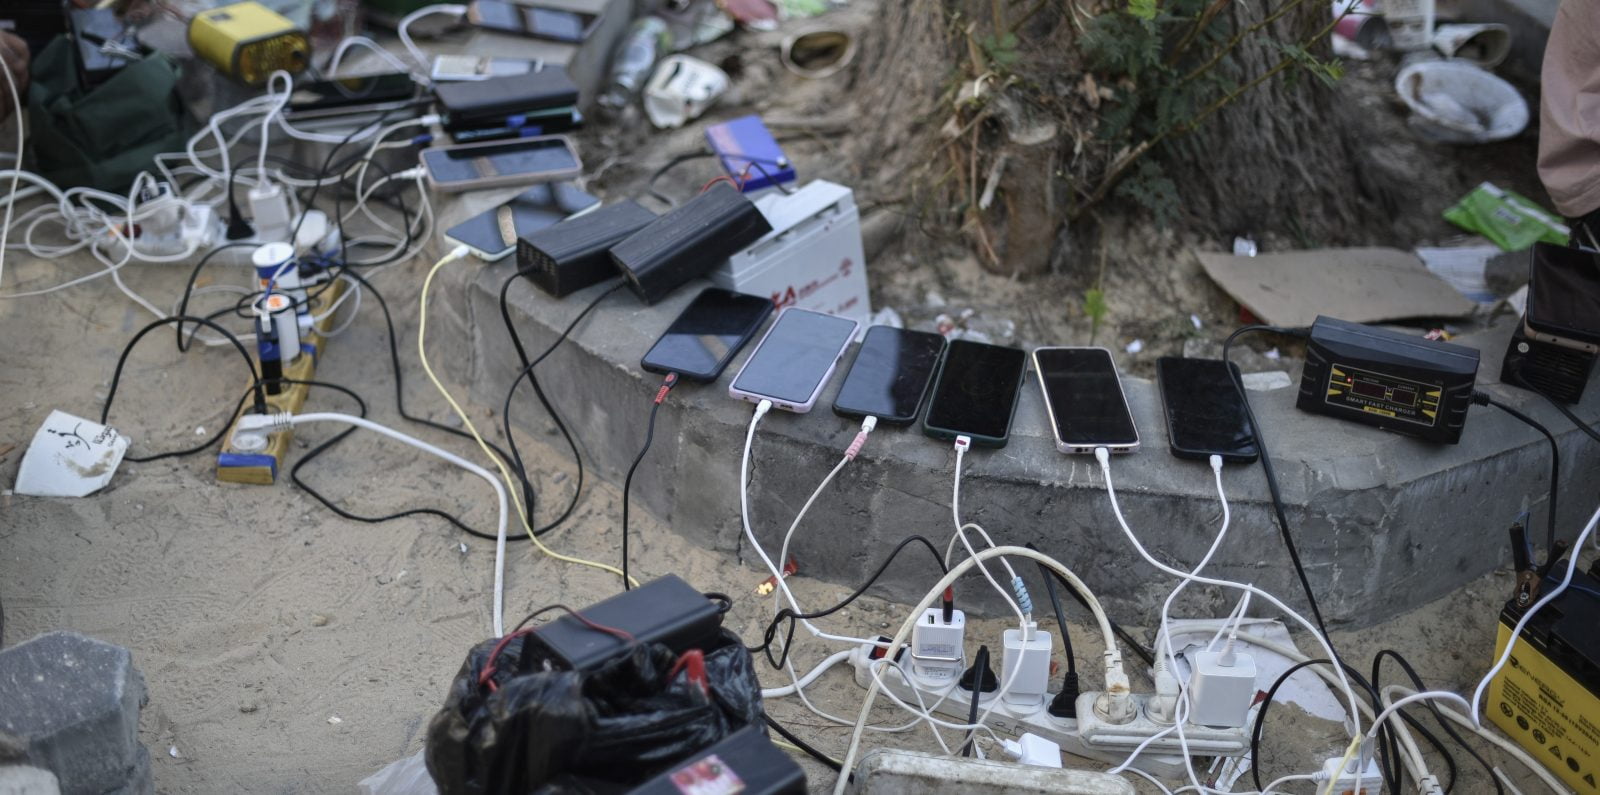 A view of Phones being charged by portable charging stations at Palestinian Red Crescent center